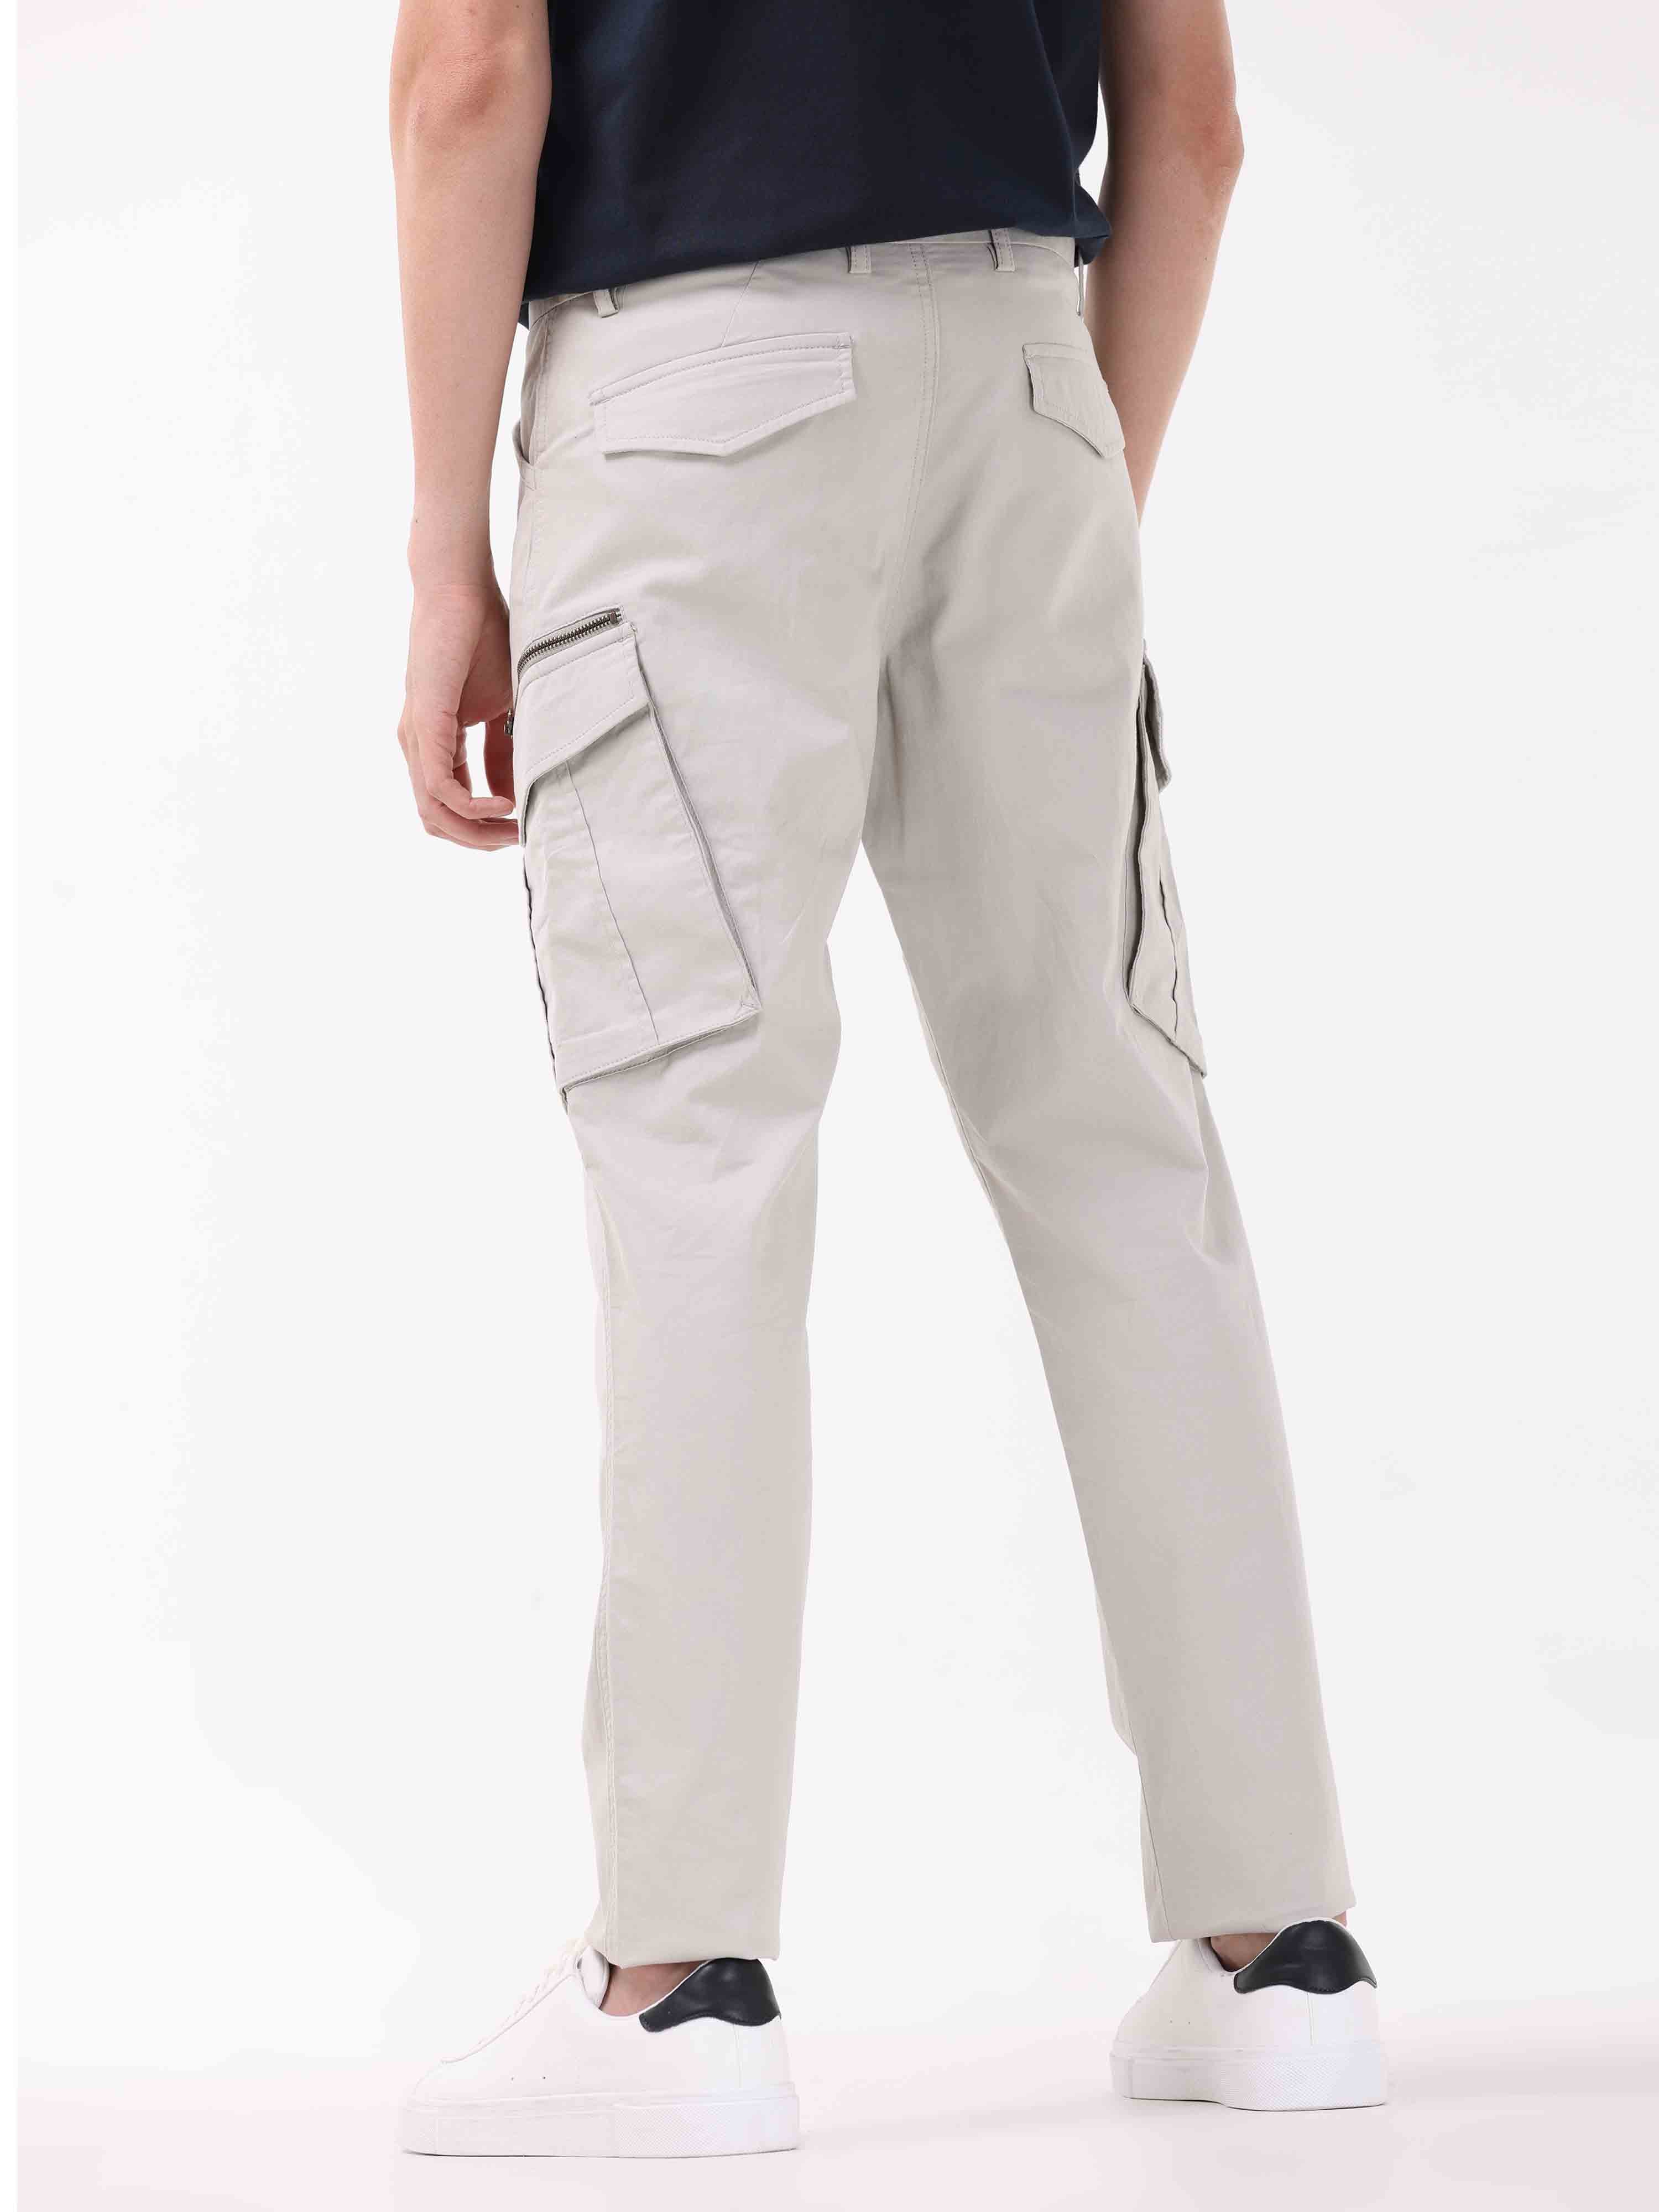 MEN'S GREY COLOR SLIM FIT CARGO PANTS, Comfortable Cargo, Latest Cargo,  Best Quality Cargo, Daily Wear